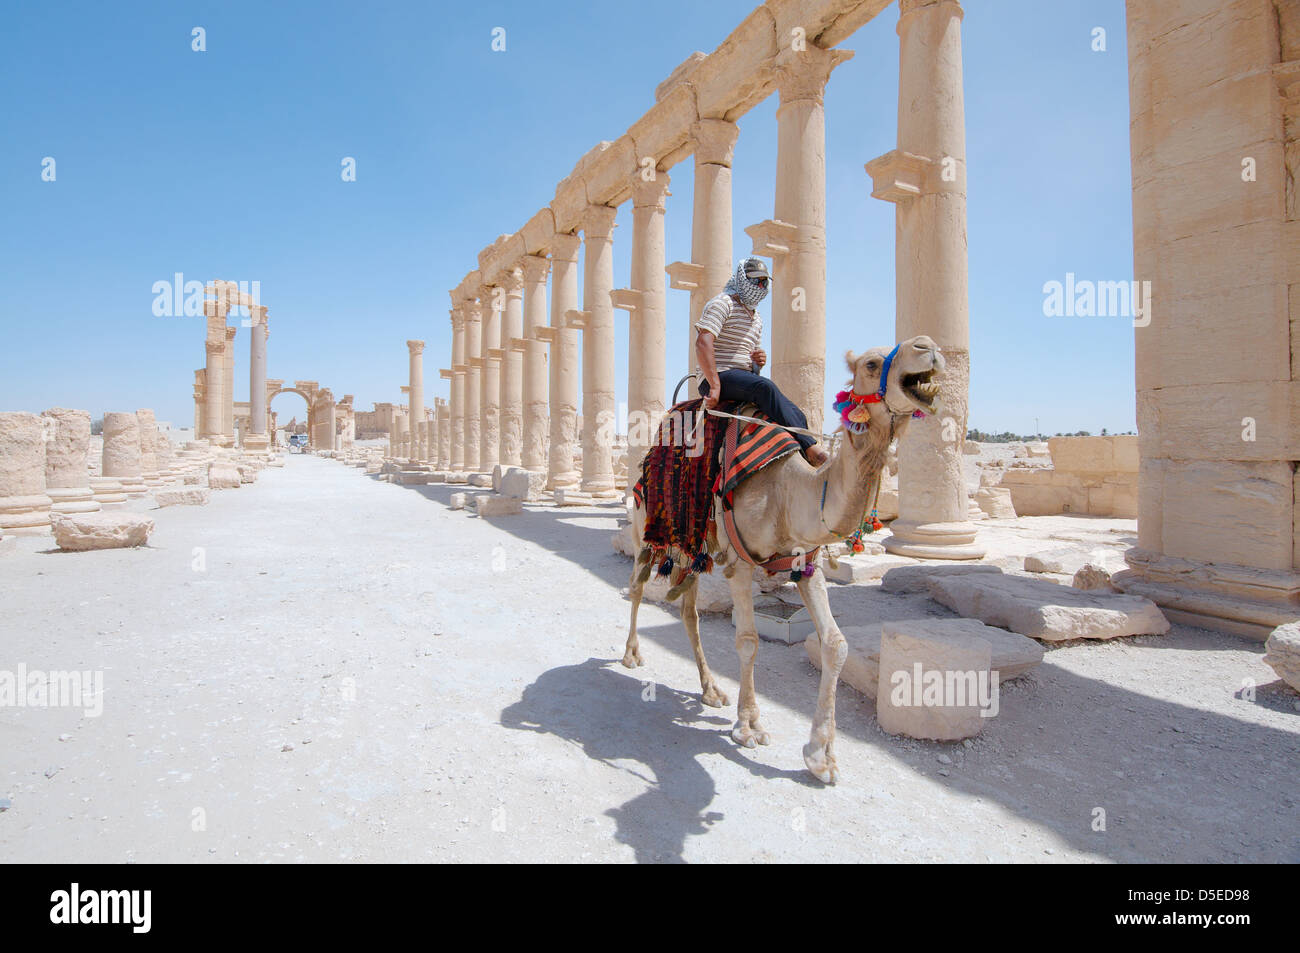 Syrian man rides on a camel near the colonnade in Palmyra, Syria Stock Photo